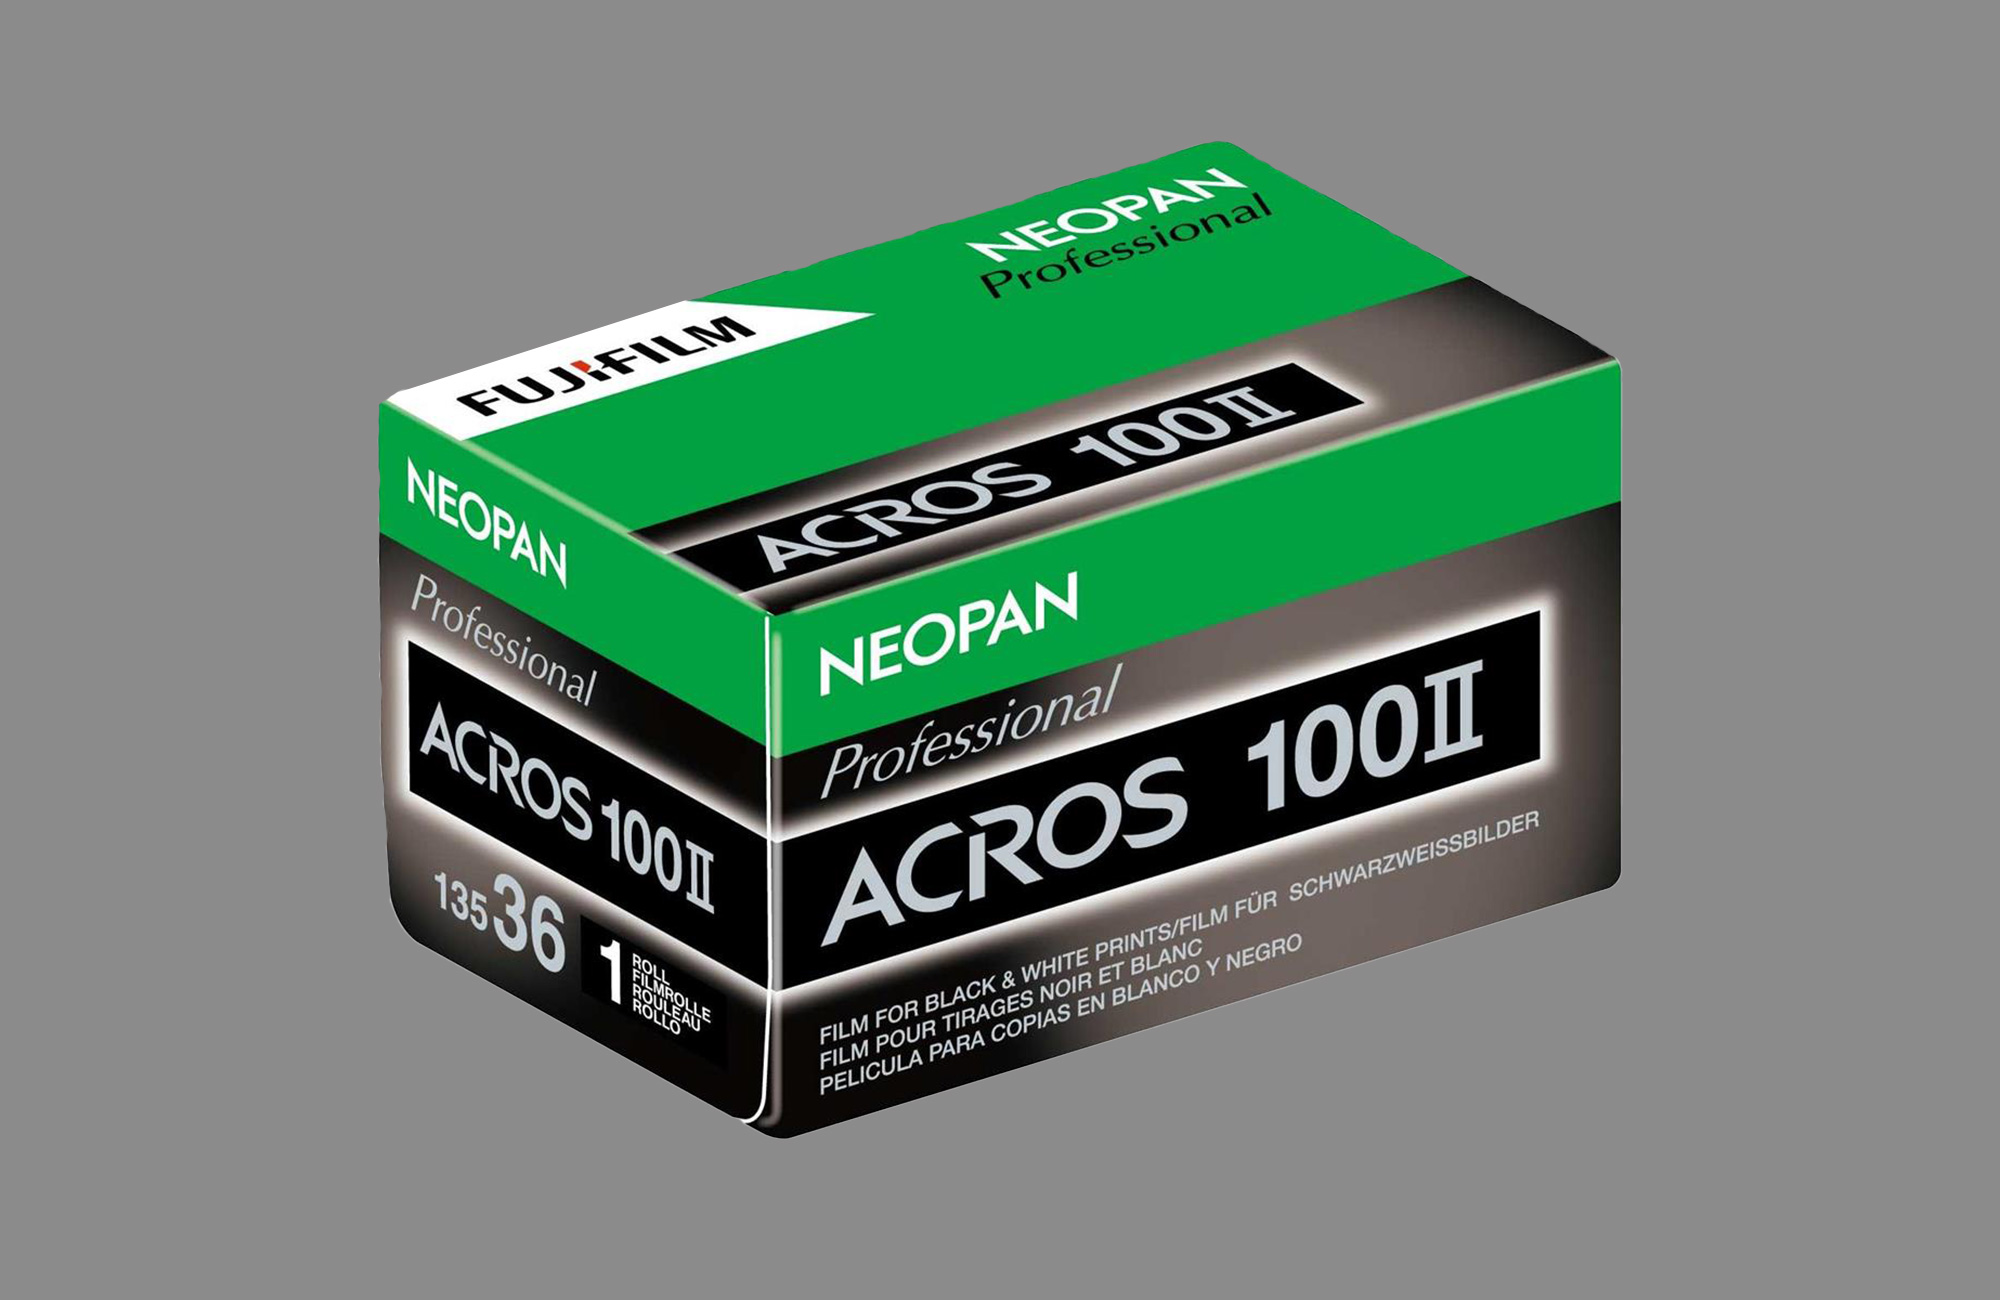 Fujifilm Acros II black-and-white film is 50 percent off at Adorama right now